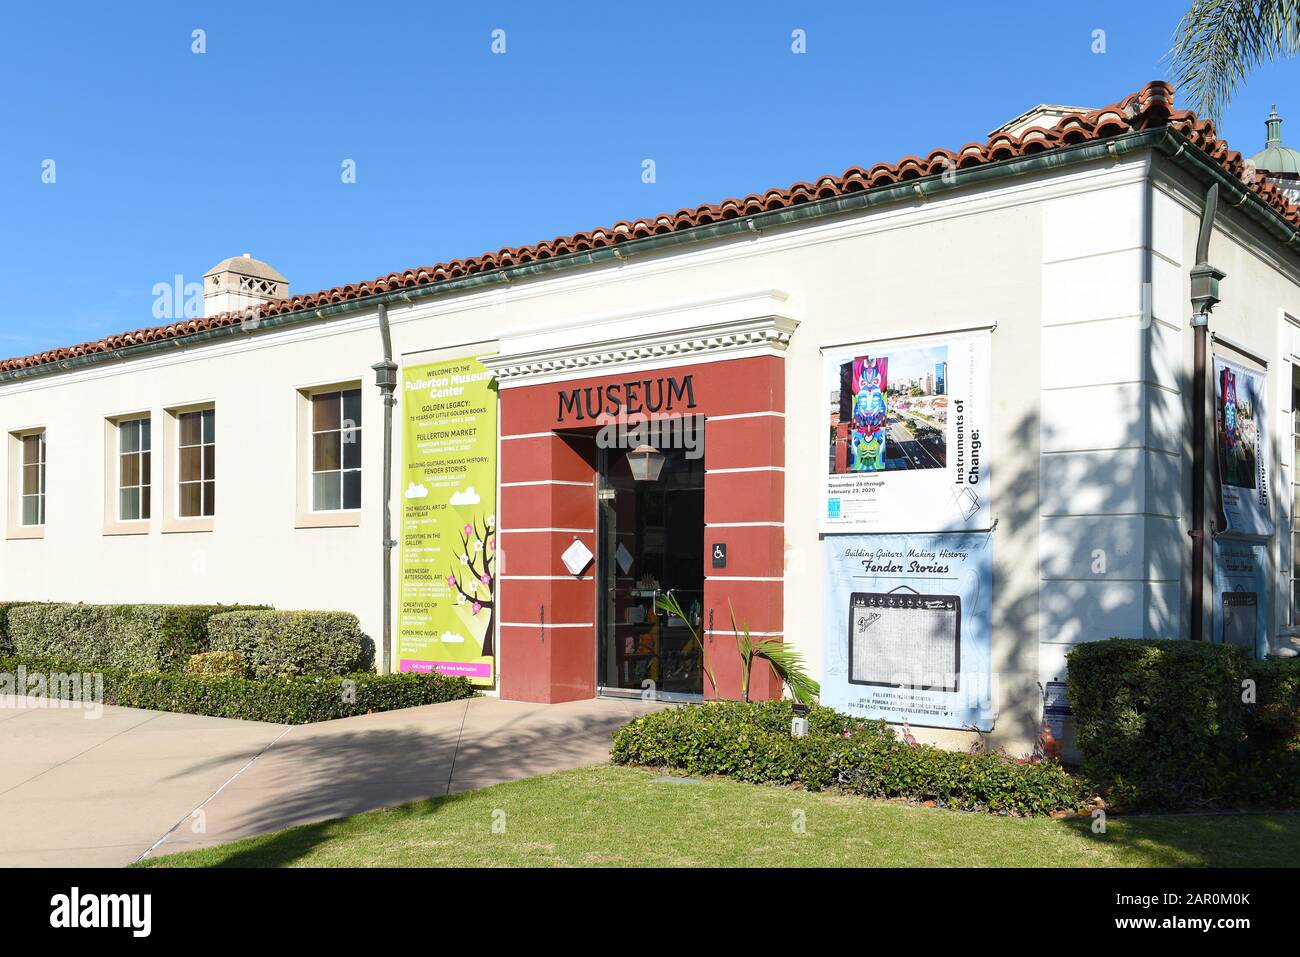 FULLERTON, CALIFORNIA - 24 JAN 2020: Fullerton Museum Center, an Educational space showcasing diverse exhibitions and programs in history, science, ar Stock Photo